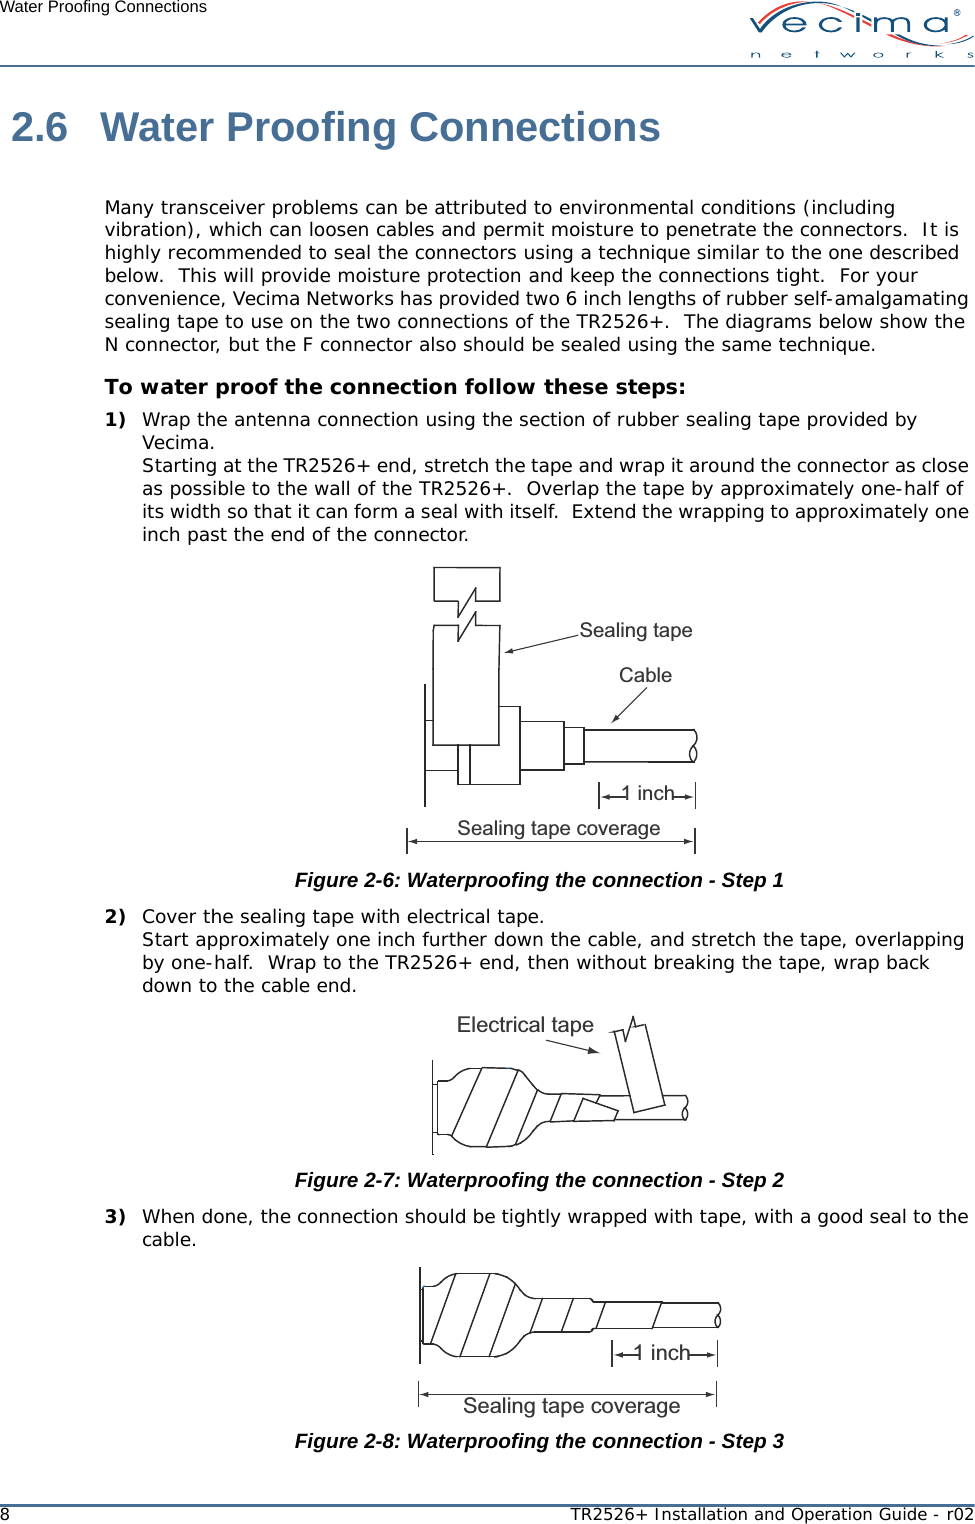 8TR2526+ Installation and Operation Guide - r02Water Proofing Connections 2.6 Water Proofing ConnectionsMany transceiver problems can be attributed to environmental conditions (including vibration), which can loosen cables and permit moisture to penetrate the connectors.  It is highly recommended to seal the connectors using a technique similar to the one described below.  This will provide moisture protection and keep the connections tight.  For your convenience, Vecima Networks has provided two 6 inch lengths of rubber self-amalgamating sealing tape to use on the two connections of the TR2526+.  The diagrams below show the N connector, but the F connector also should be sealed using the same technique.To water proof the connection follow these steps:1) Wrap the antenna connection using the section of rubber sealing tape provided by Vecima. Starting at the TR2526+ end, stretch the tape and wrap it around the connector as close as possible to the wall of the TR2526+.  Overlap the tape by approximately one-half of its width so that it can form a seal with itself.  Extend the wrapping to approximately one inch past the end of the connector.Figure 2-6: Waterproofing the connection - Step 12) Cover the sealing tape with electrical tape. Start approximately one inch further down the cable, and stretch the tape, overlapping by one-half.  Wrap to the TR2526+ end, then without breaking the tape, wrap back down to the cable end.Figure 2-7: Waterproofing the connection - Step 23) When done, the connection should be tightly wrapped with tape, with a good seal to the cable.Figure 2-8: Waterproofing the connection - Step 3Sealing tapeSealing tape coverage1 inchCableElectrical tapeSealing tape coverage1 inch